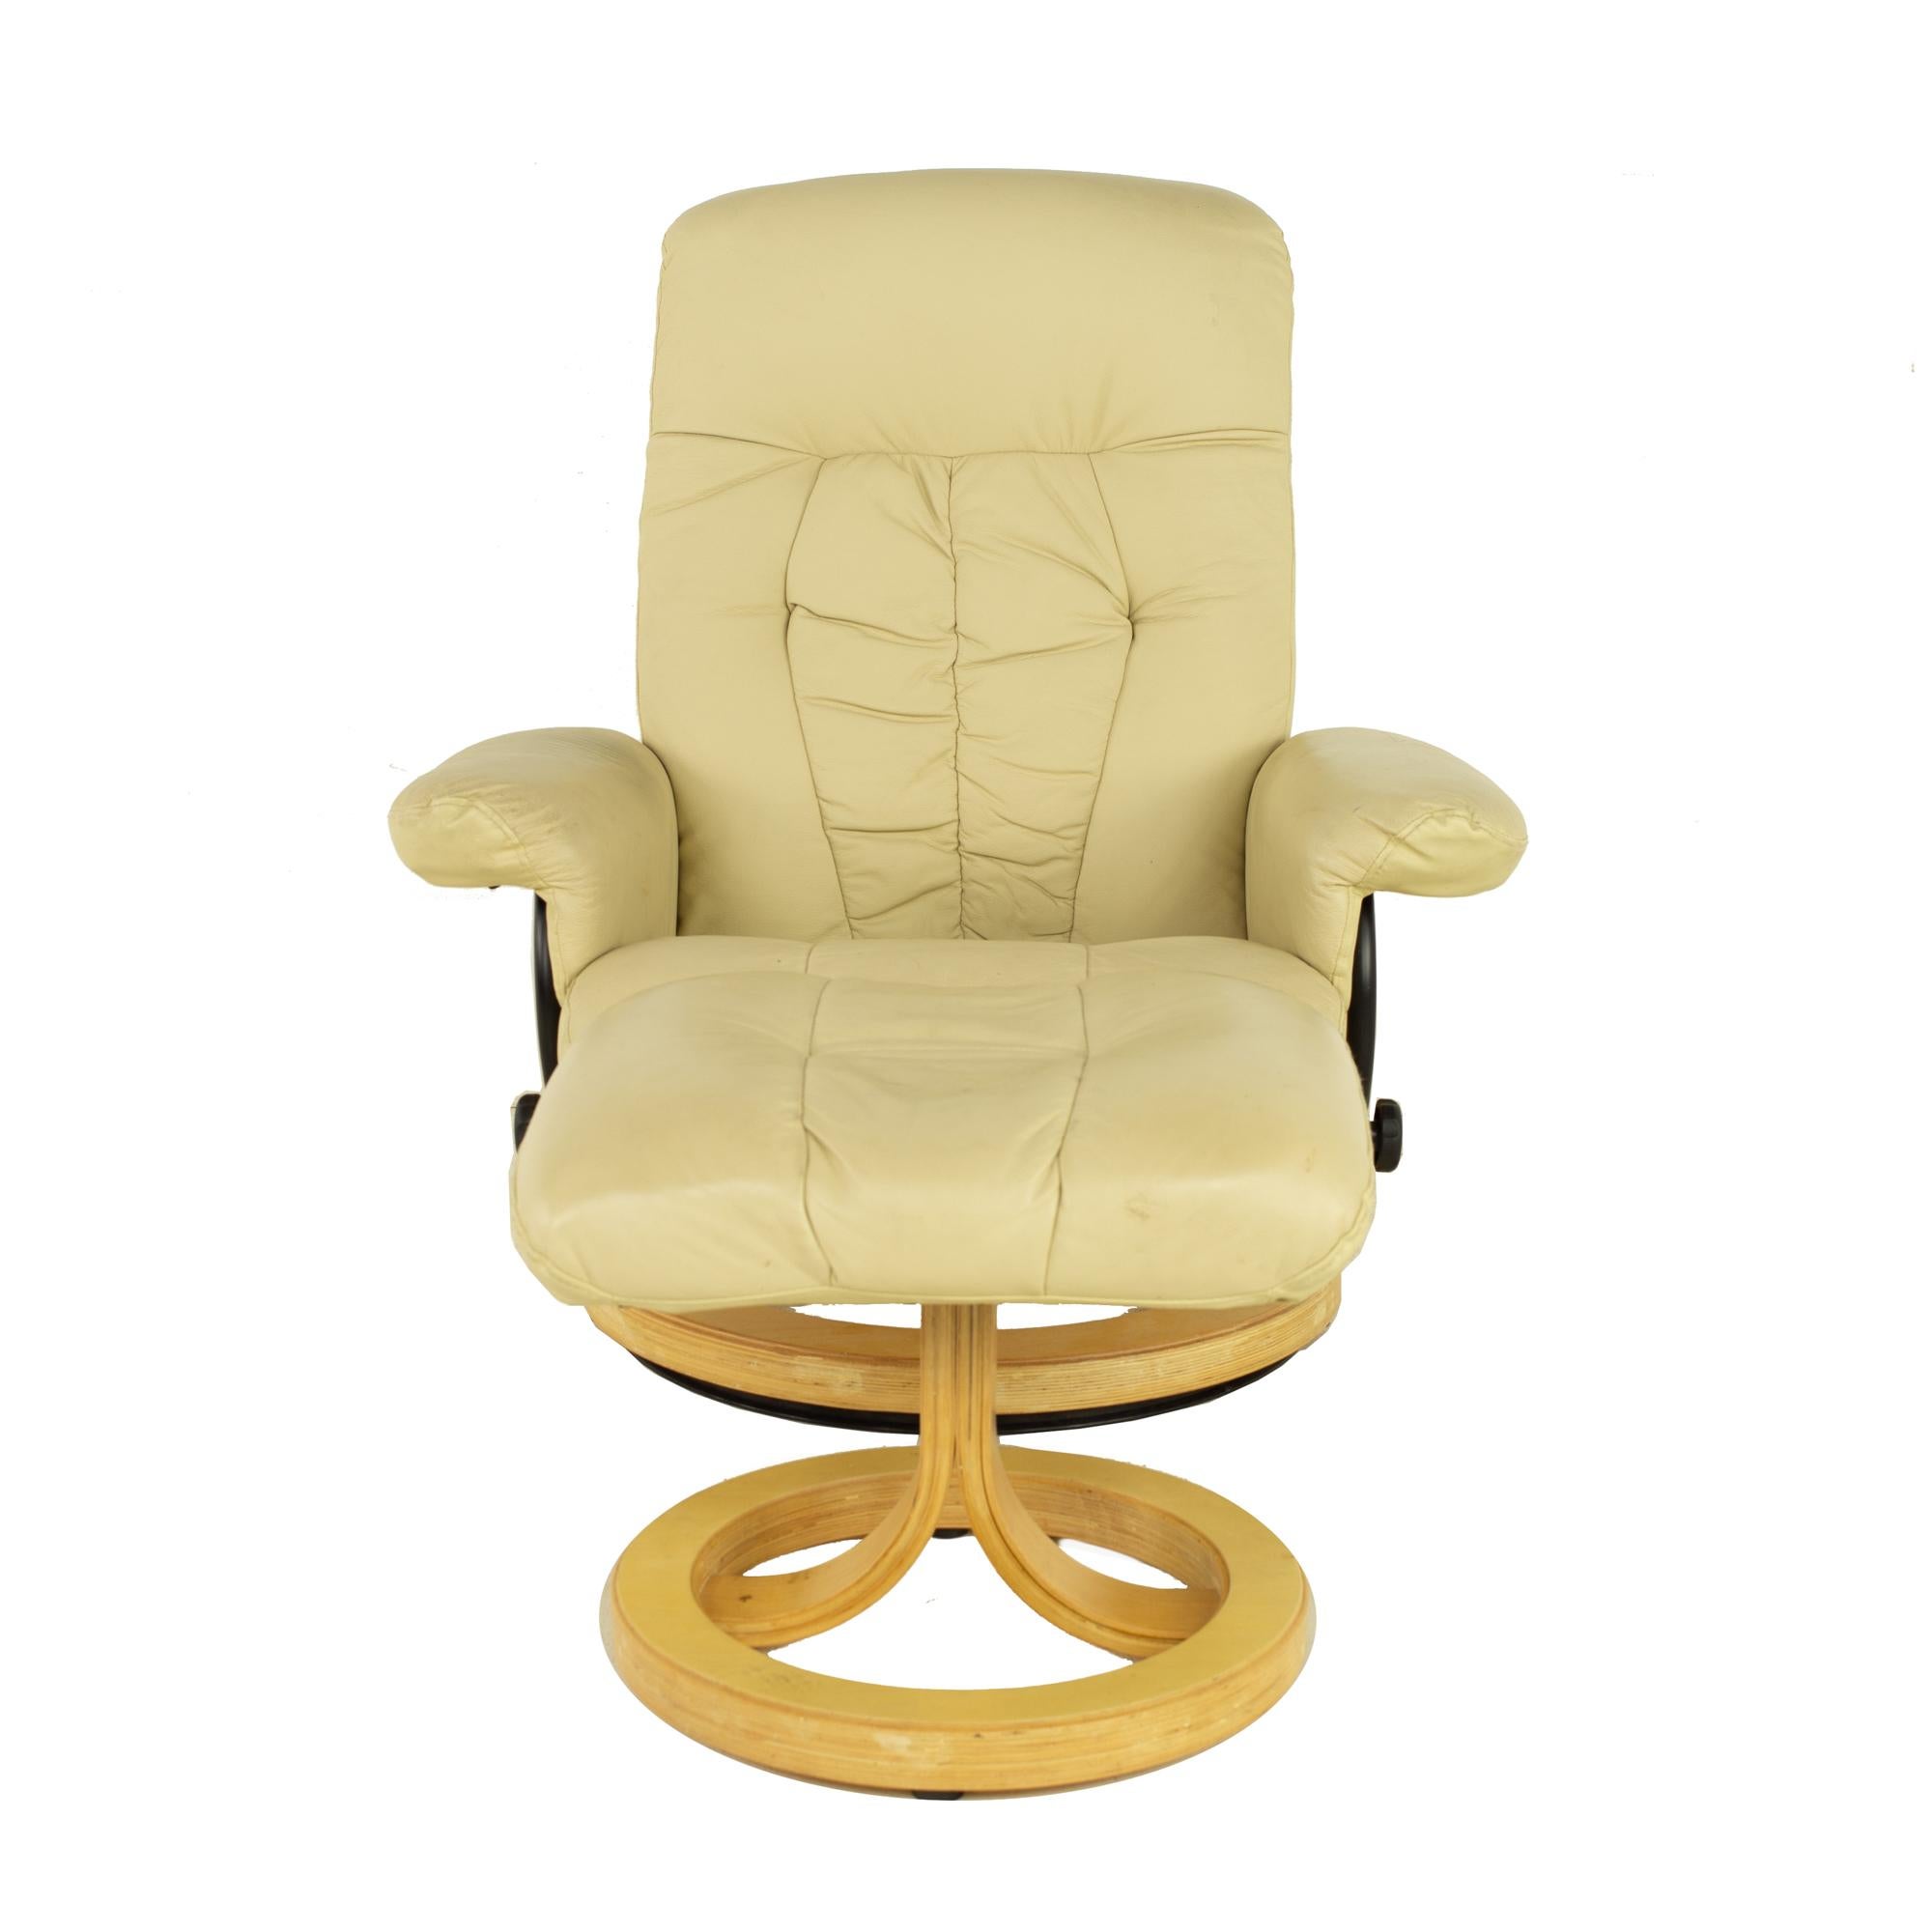 Ekornes Stressless Style Mid Century Leather Lounge Chair and Ottoman

This chair measures: 35 wide x 29 deep x 38 inches high, with a seat height of 14 and arm height of 23 inches, with ottoman 45 inches deep

All pieces of furniture can be had in